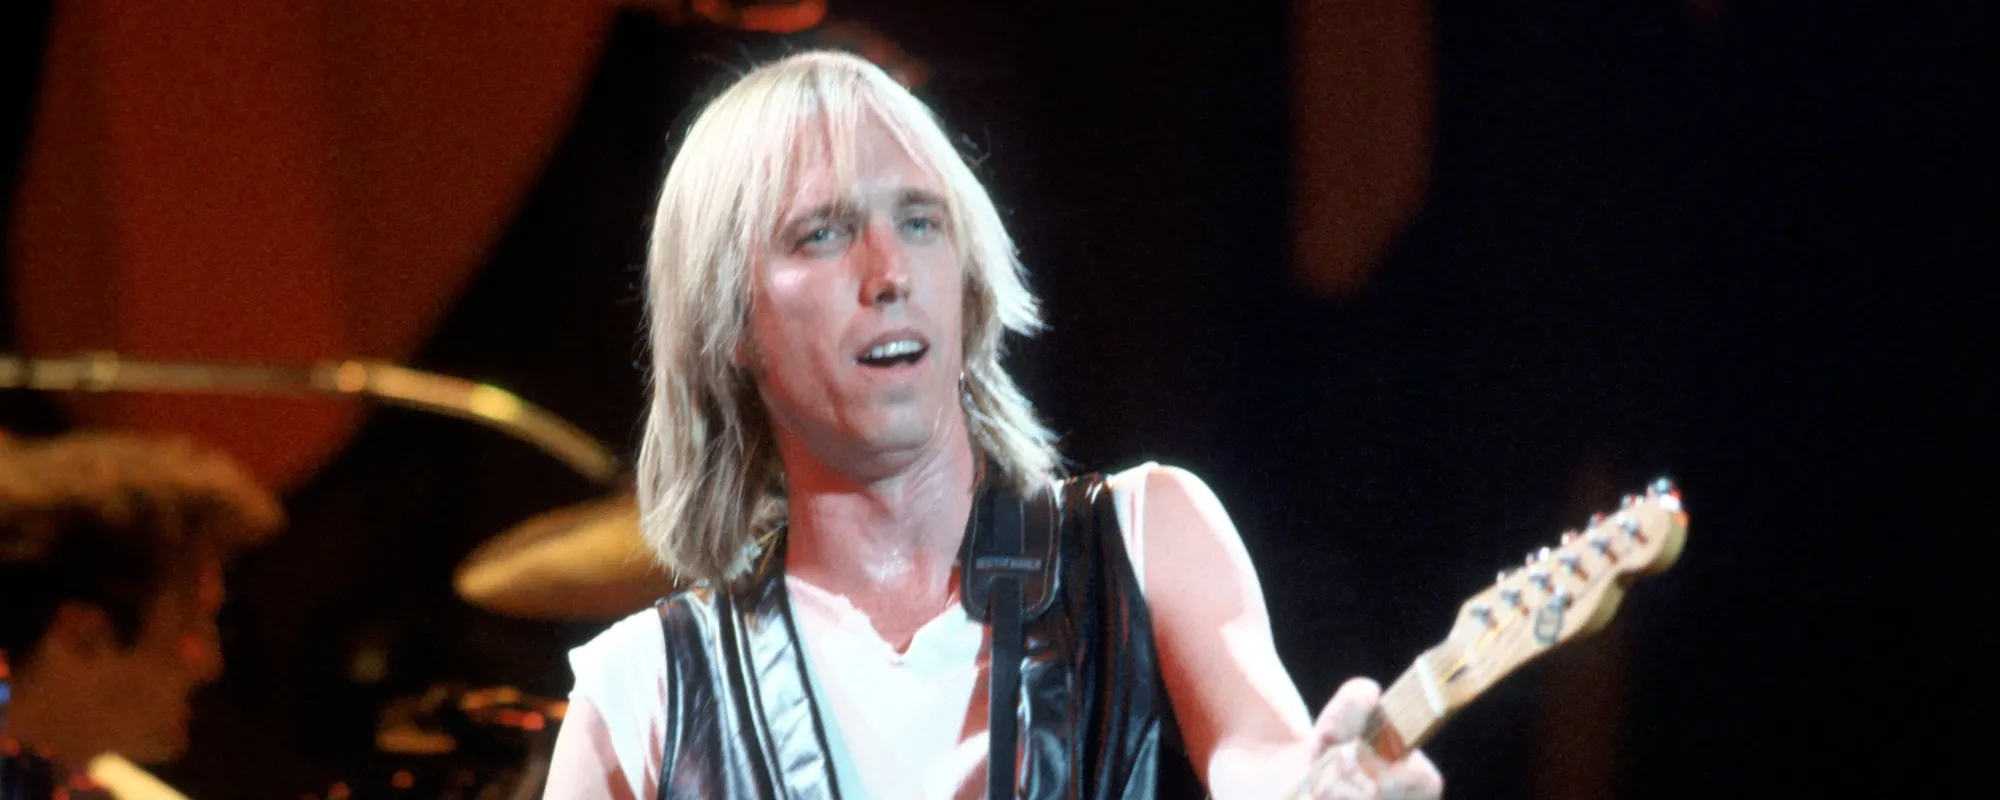 4 Songwriting Tips Tom Petty Shared Throughout His Career